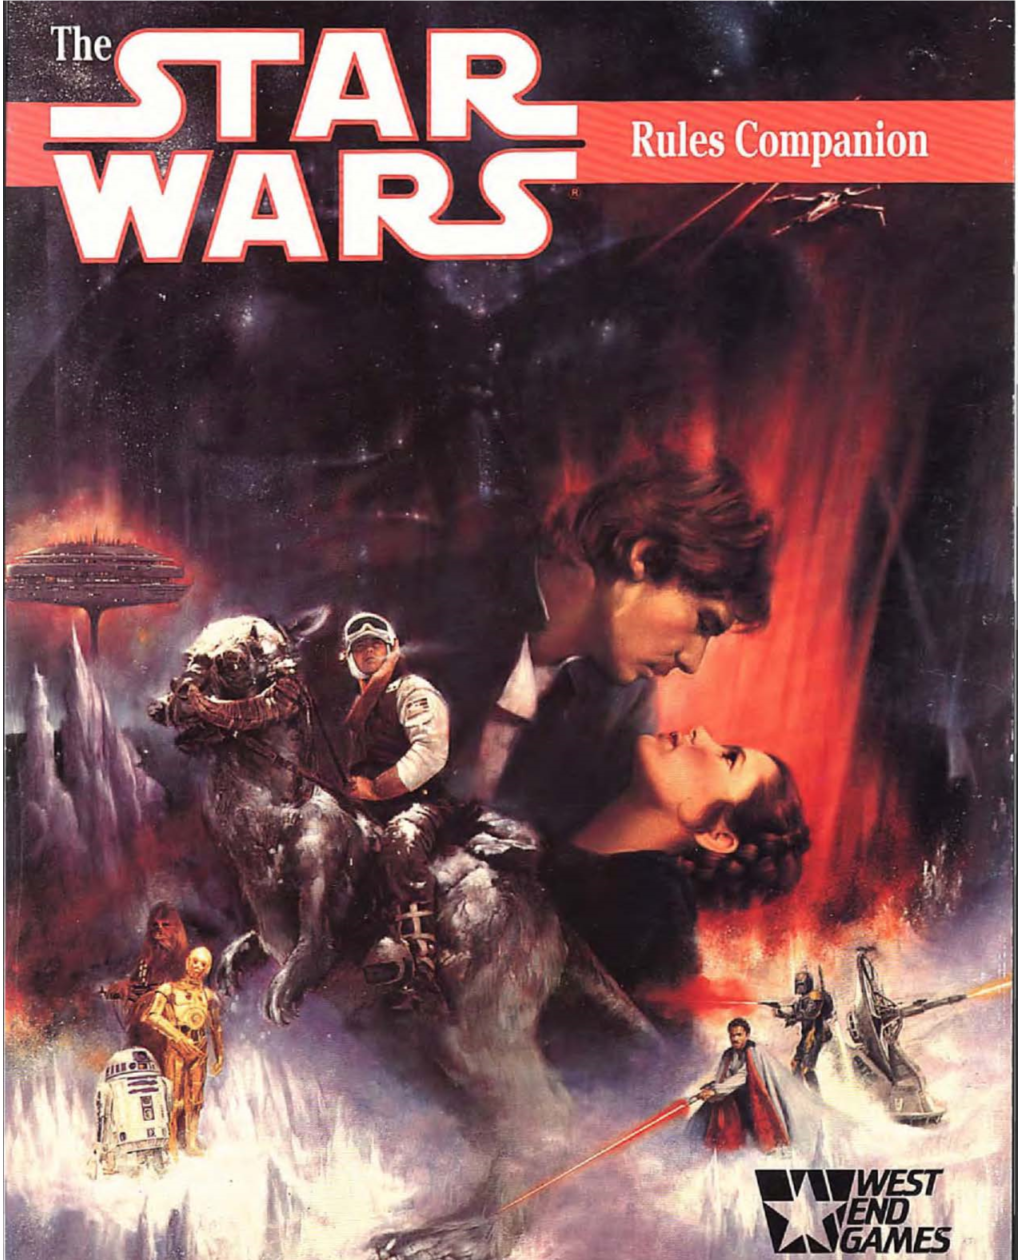 Rules Companion by Greg Gorden